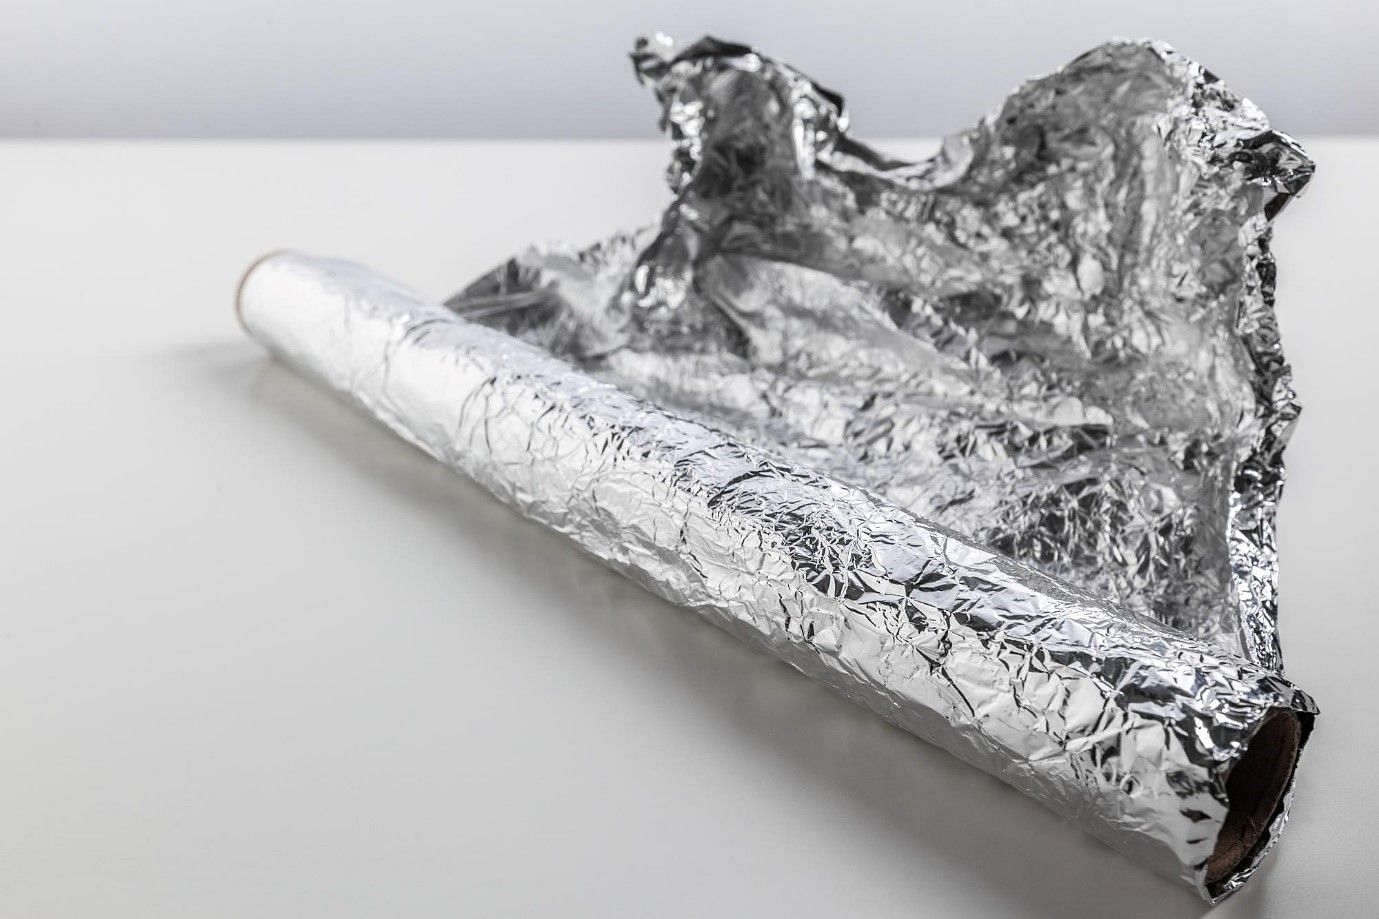 The daily use of aluminium foil could be harmful to health. (image by fabrikasimf on freepik)